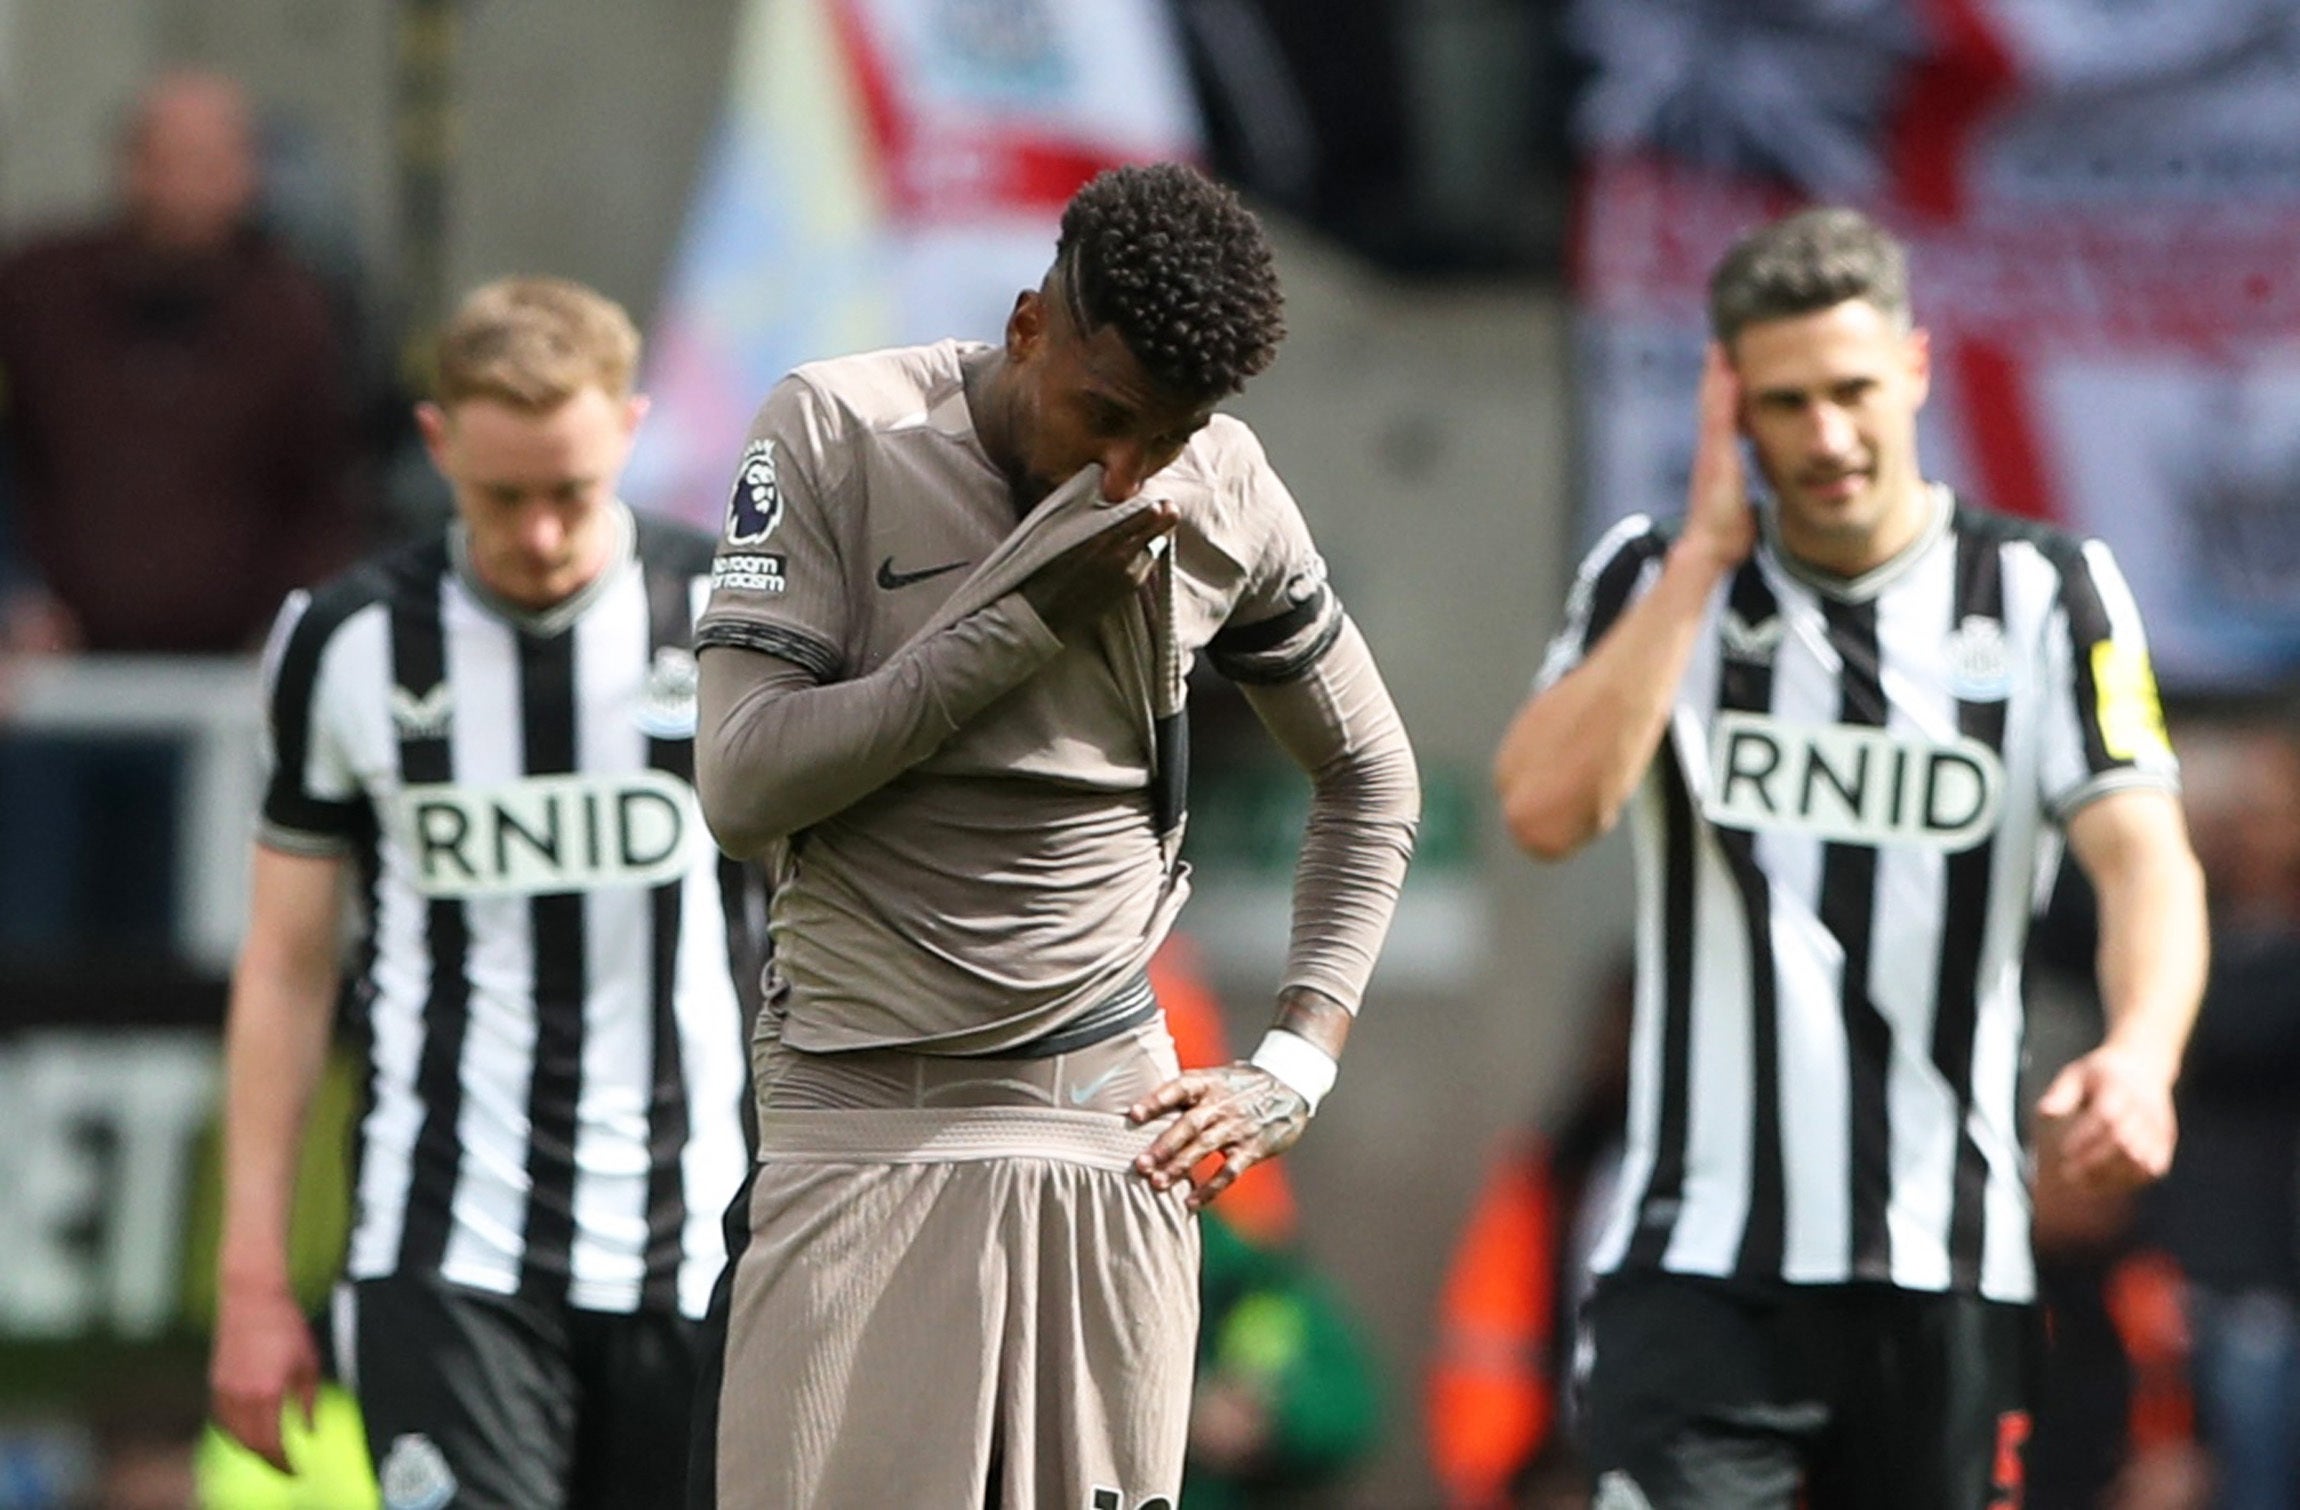 Tottenham fell to a heavy defeat at Newcastle